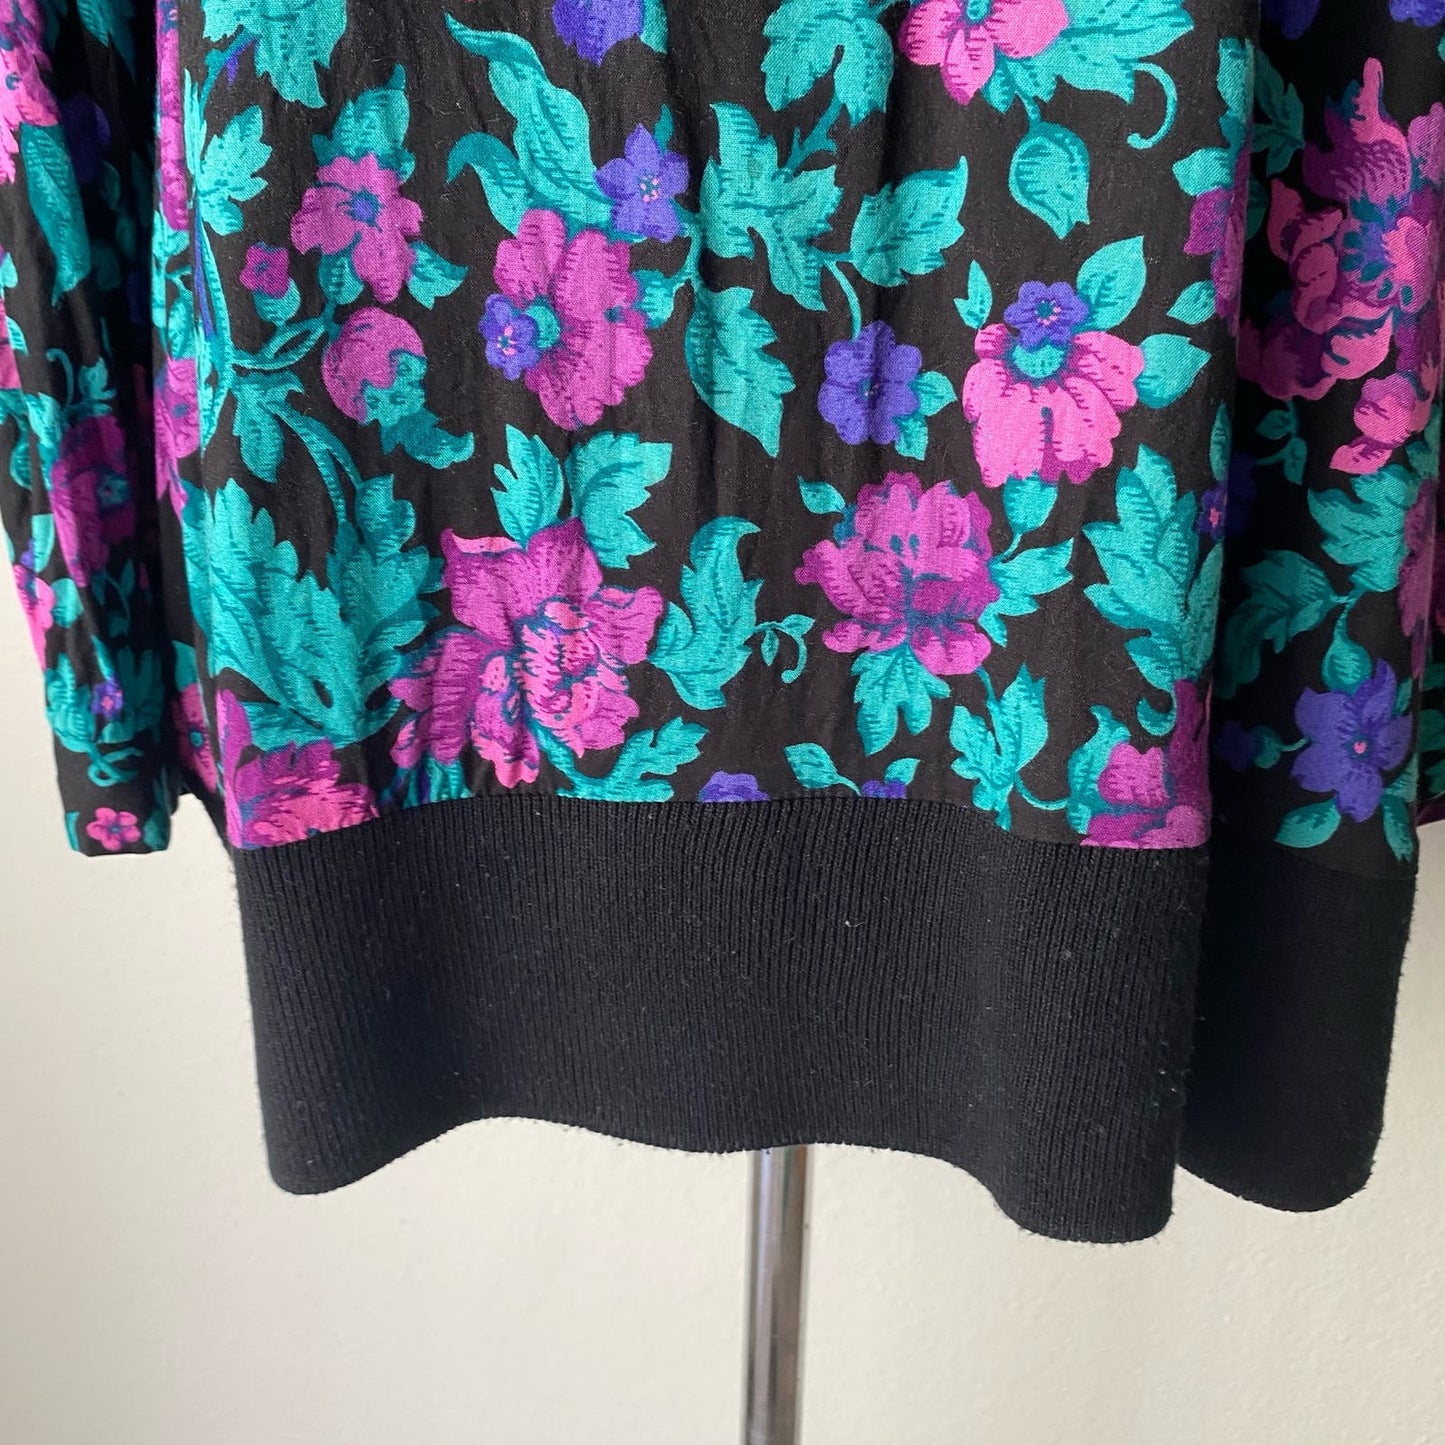 CB sz M Made in U.S. floral Vintage blouse